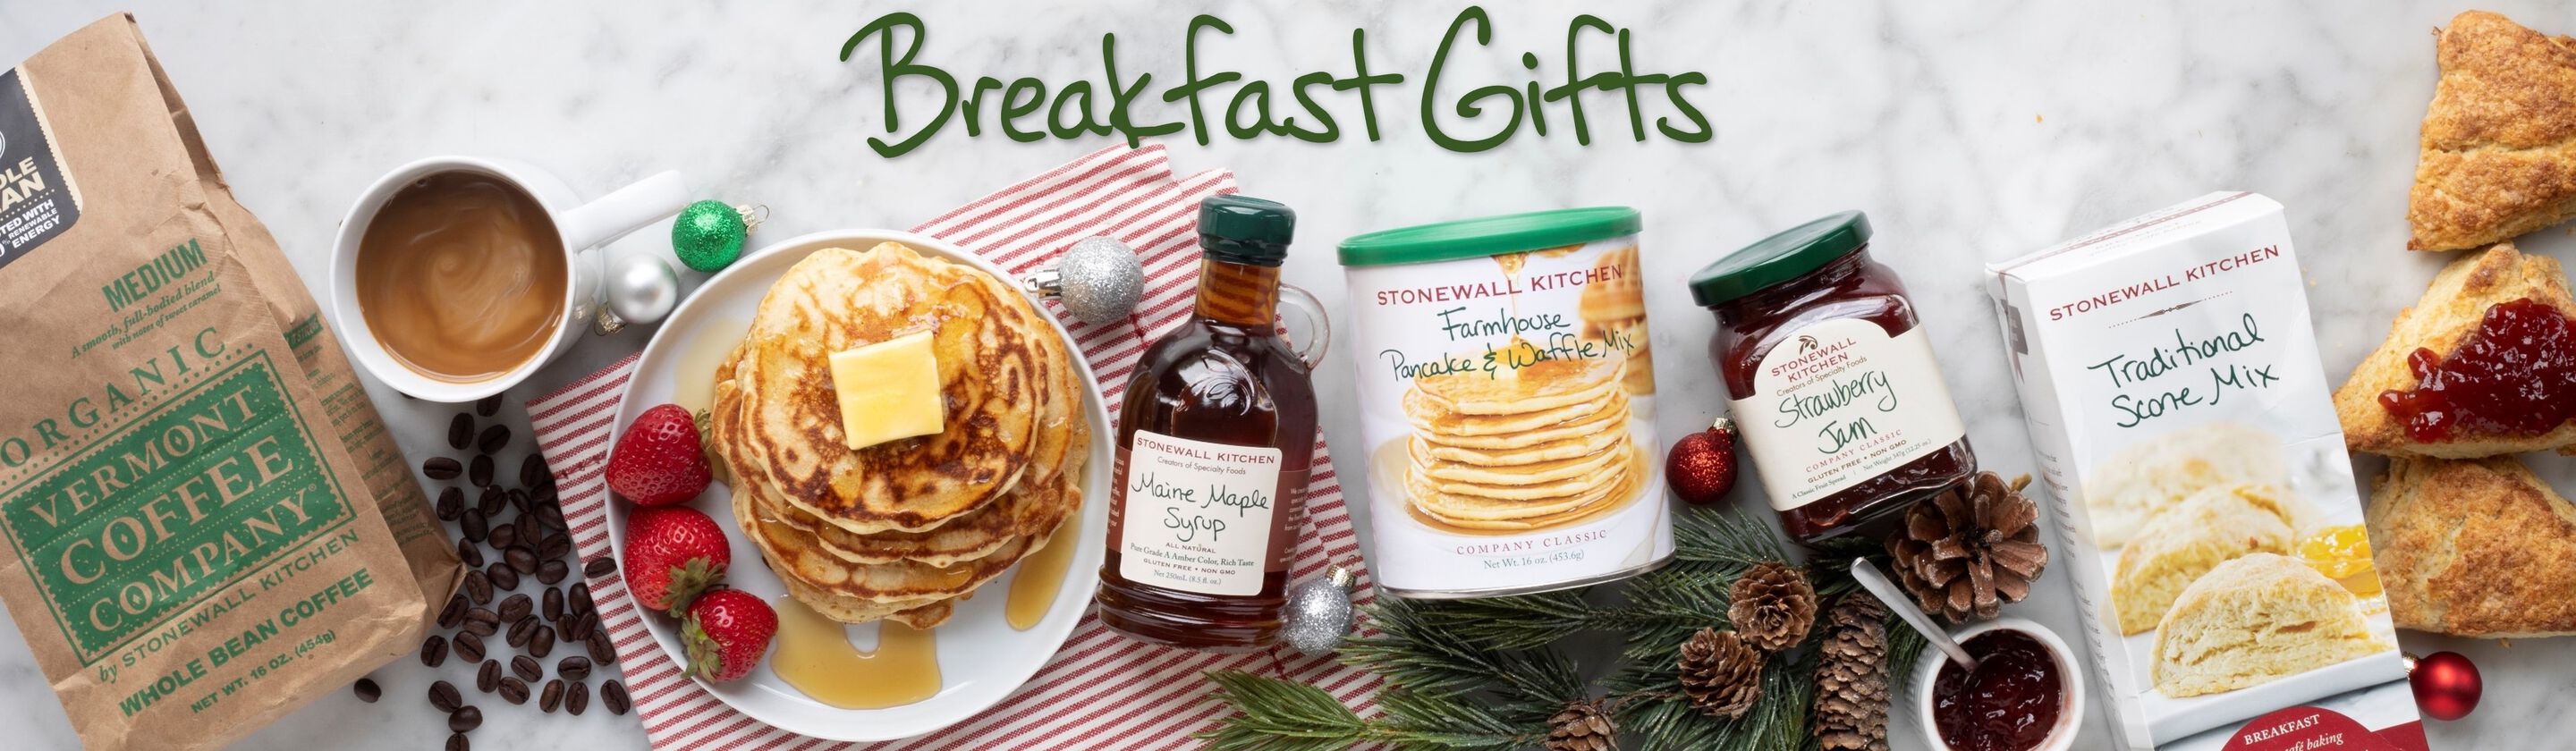 gift guide for coffee lovers + a giveaway! - Jelly Toast